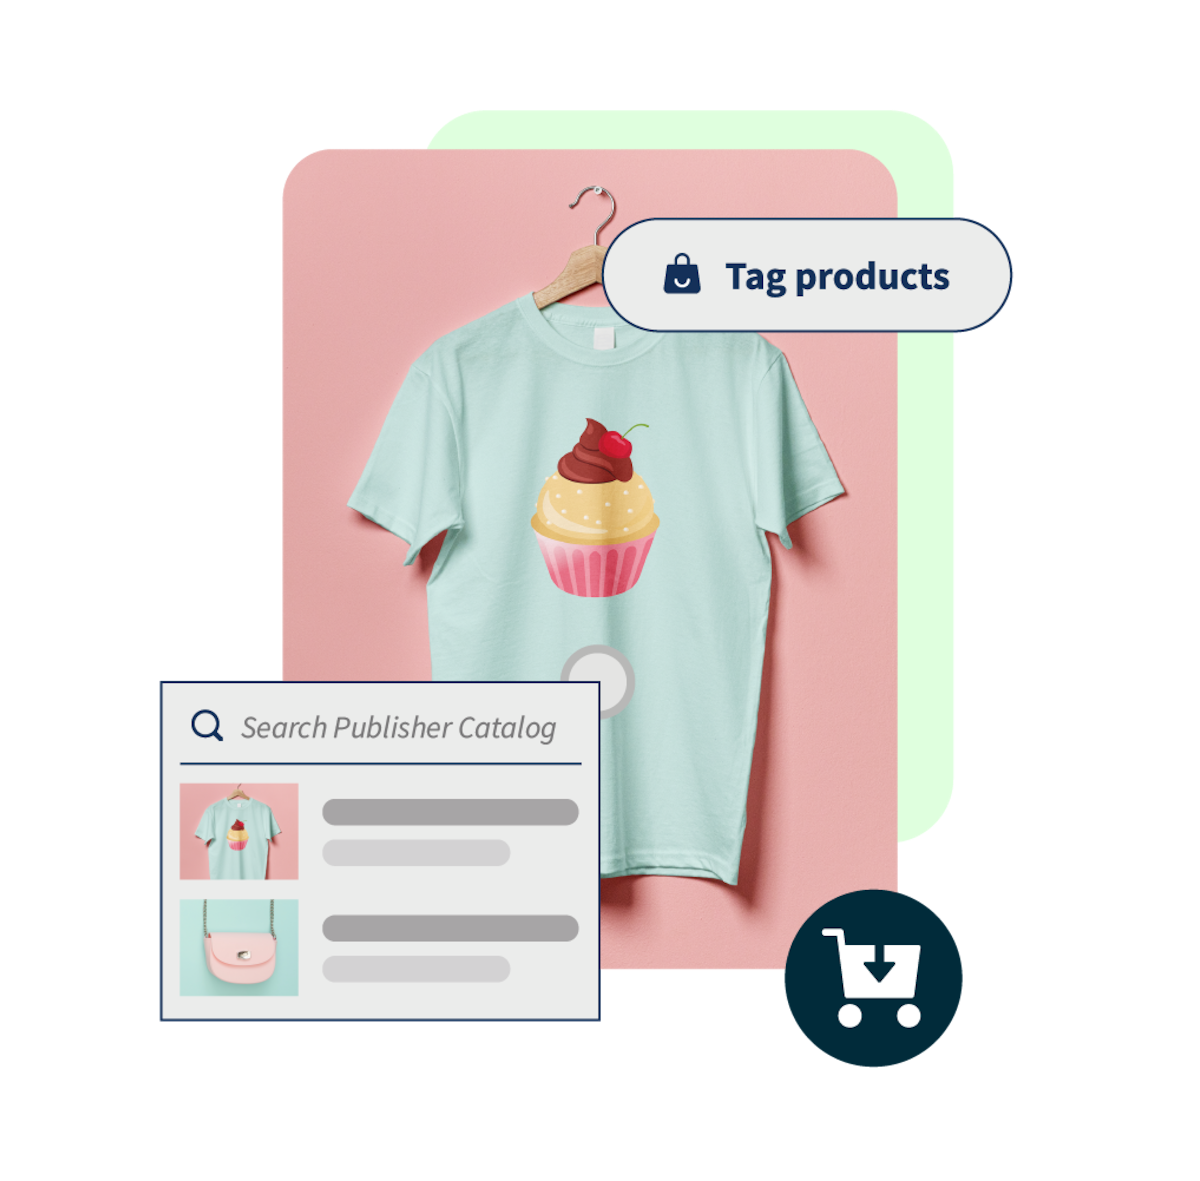 T-shirt with a picture of a cupcake, button that says "tag products" next to it